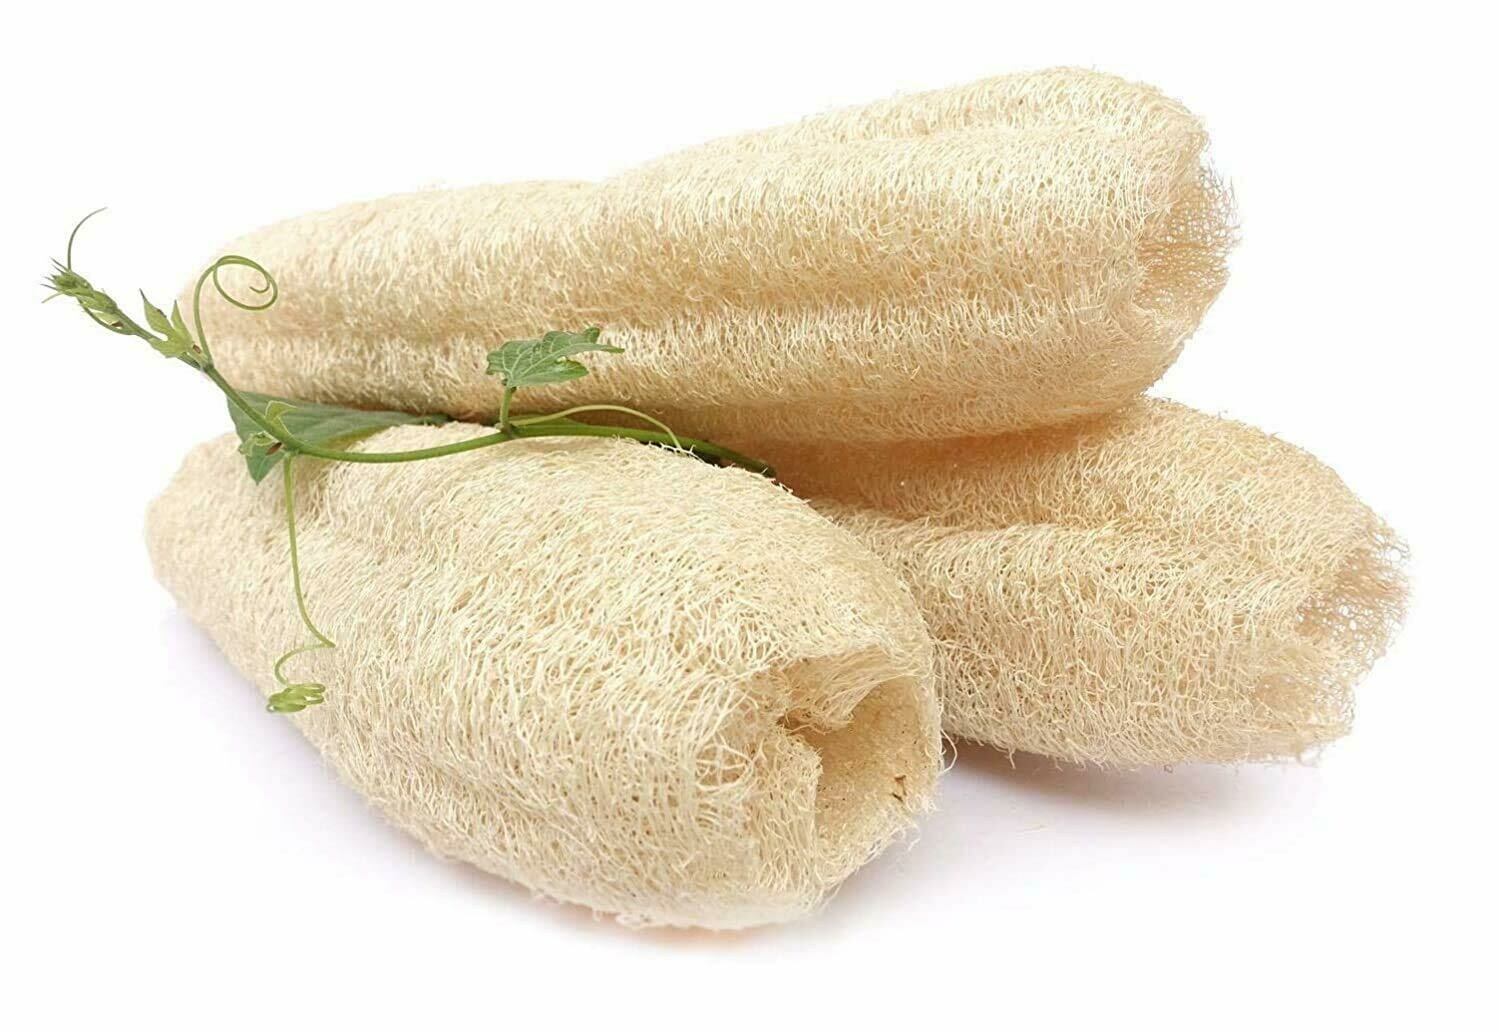 Natural, Eco-Friendly Loofah Scrubber for Bathing, Exfoliate, Cleanse Skin, or Wash Utensils